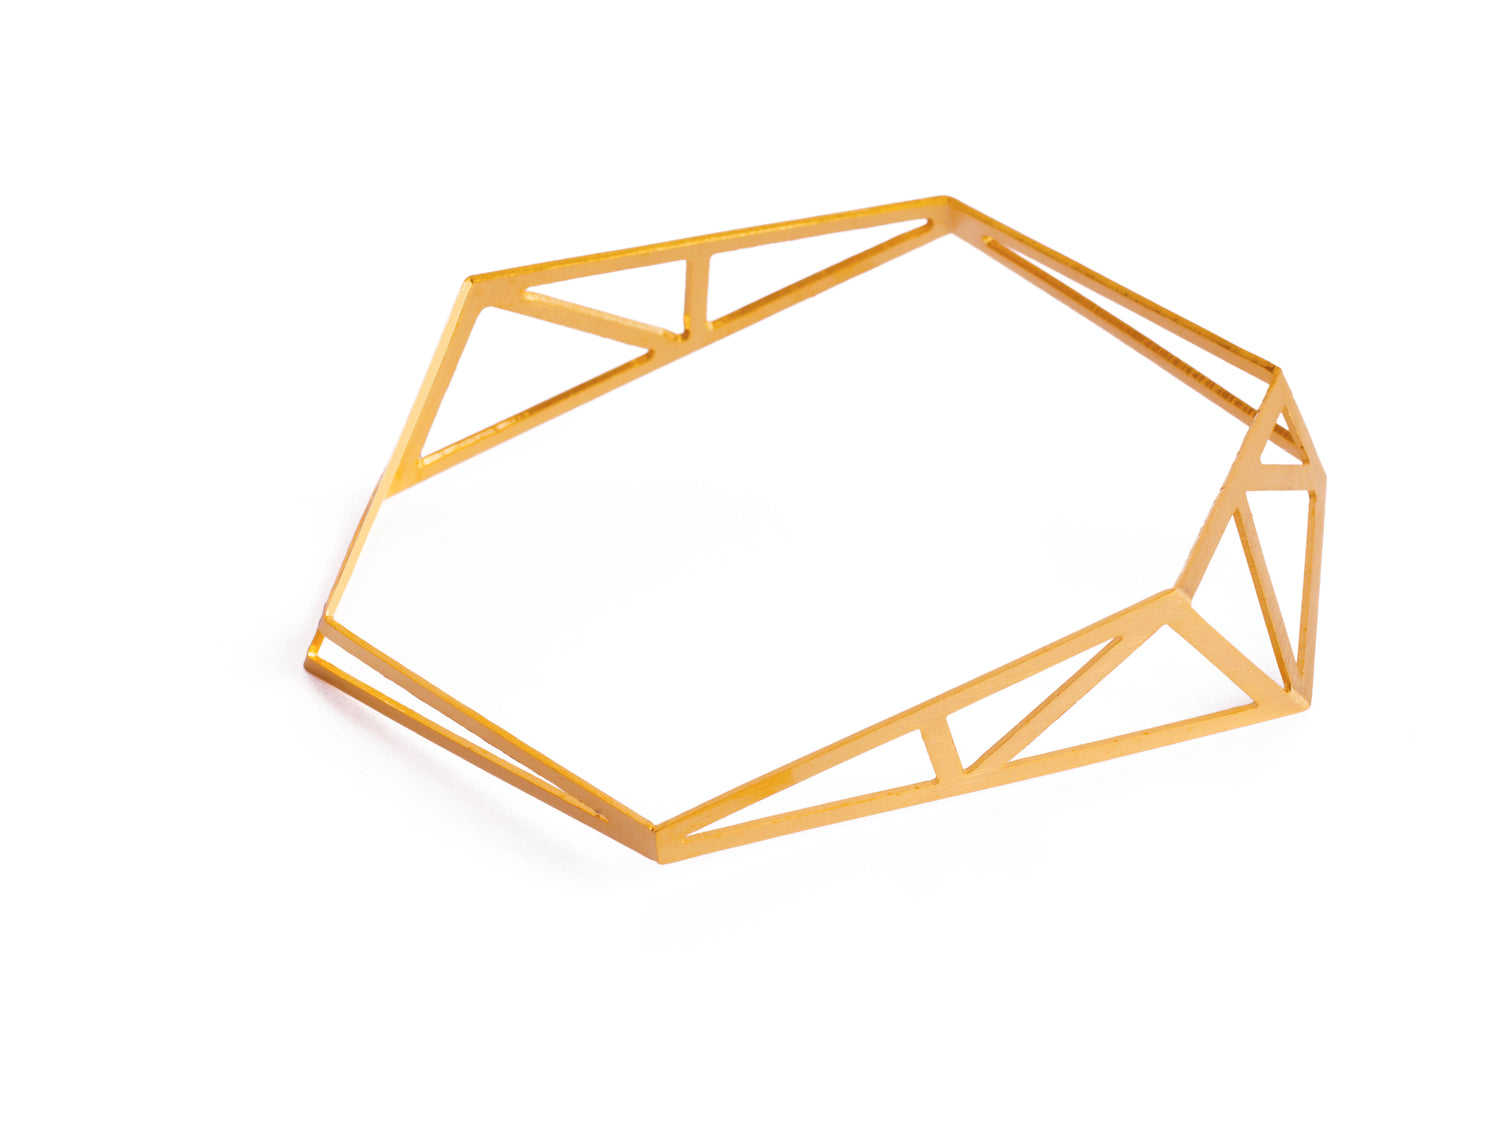 Architecture inspired geometric gold bangle made of folded and cut out metal sheet. Inspired by steel constructions, lightweight, three-dimensional